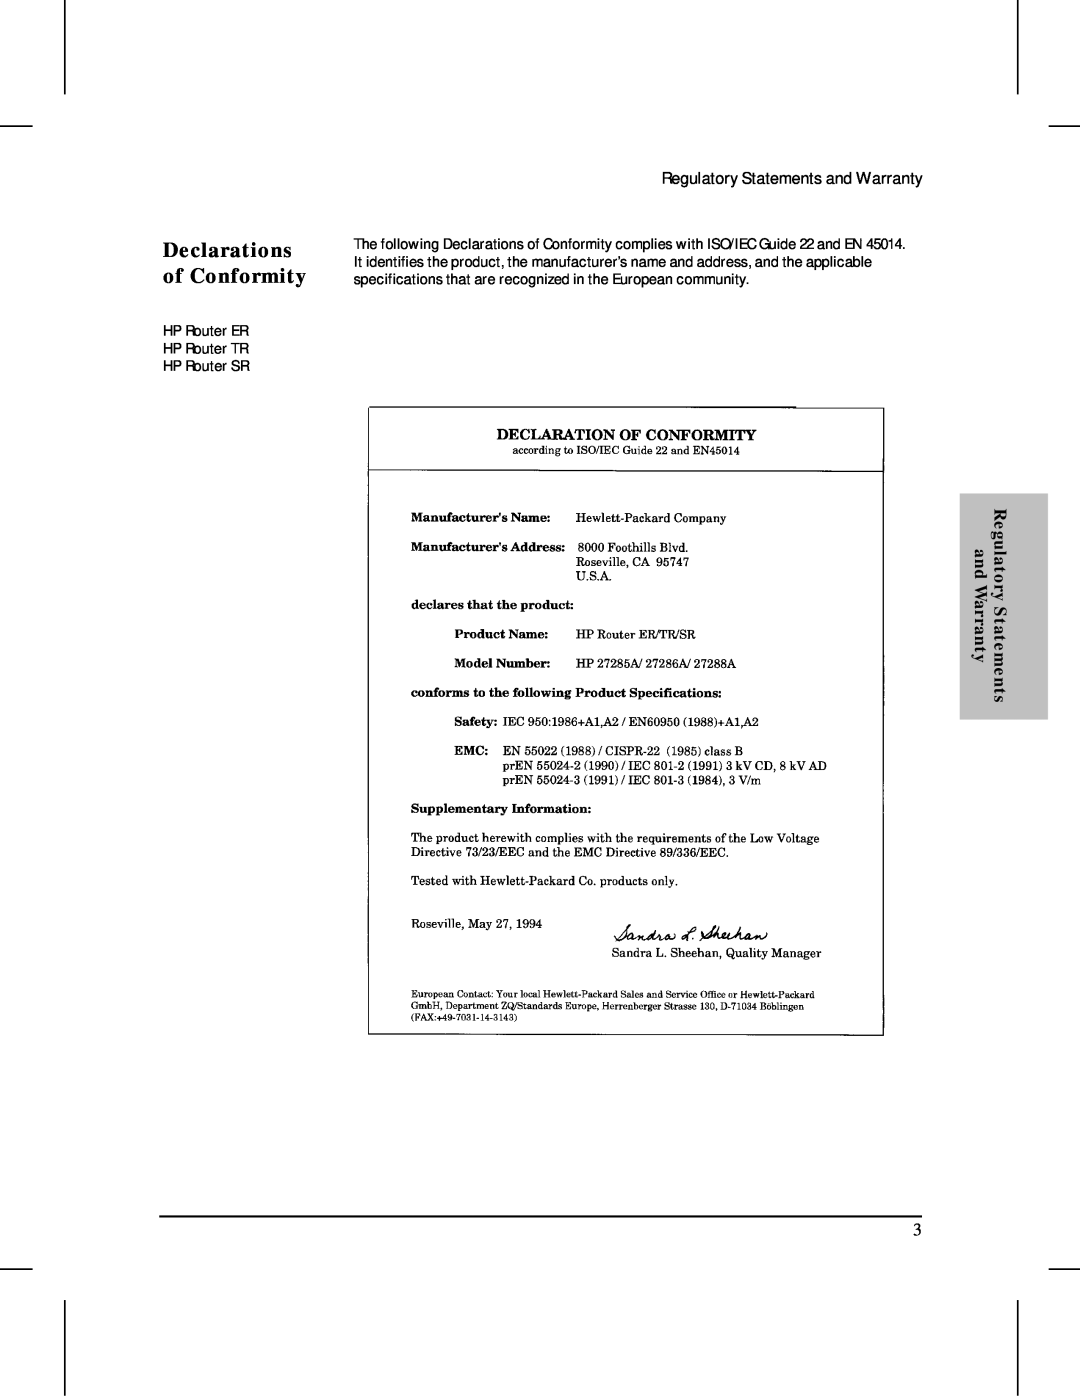 HP 480 manual Declarations of Conformity, Regulatory Statements and Warranty, HP Router ER HP Router TR HP Router SR 